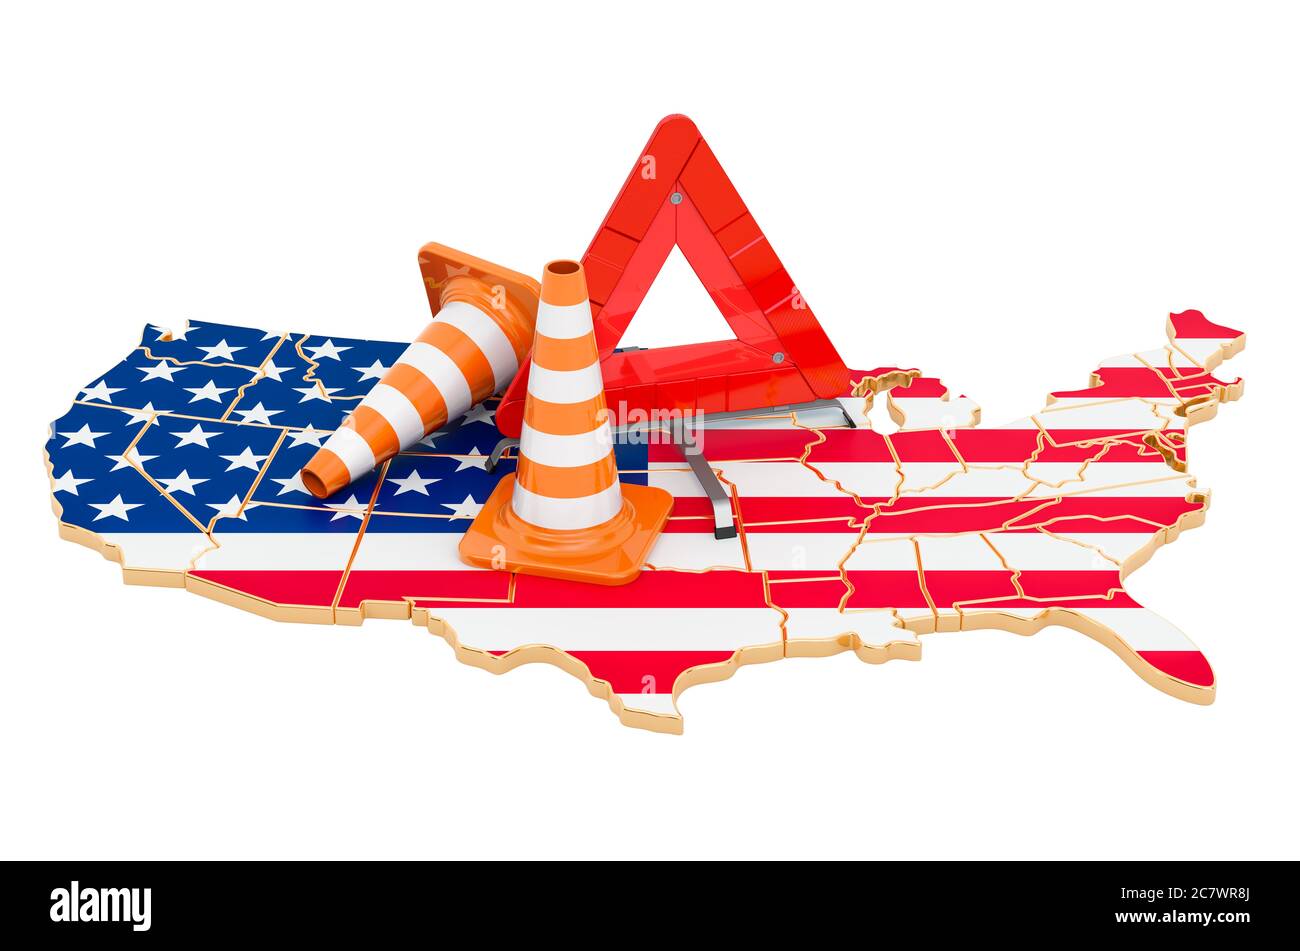 The United States map with traffic cones and warning triangle, 3D rendering isolated on white background Stock Photo